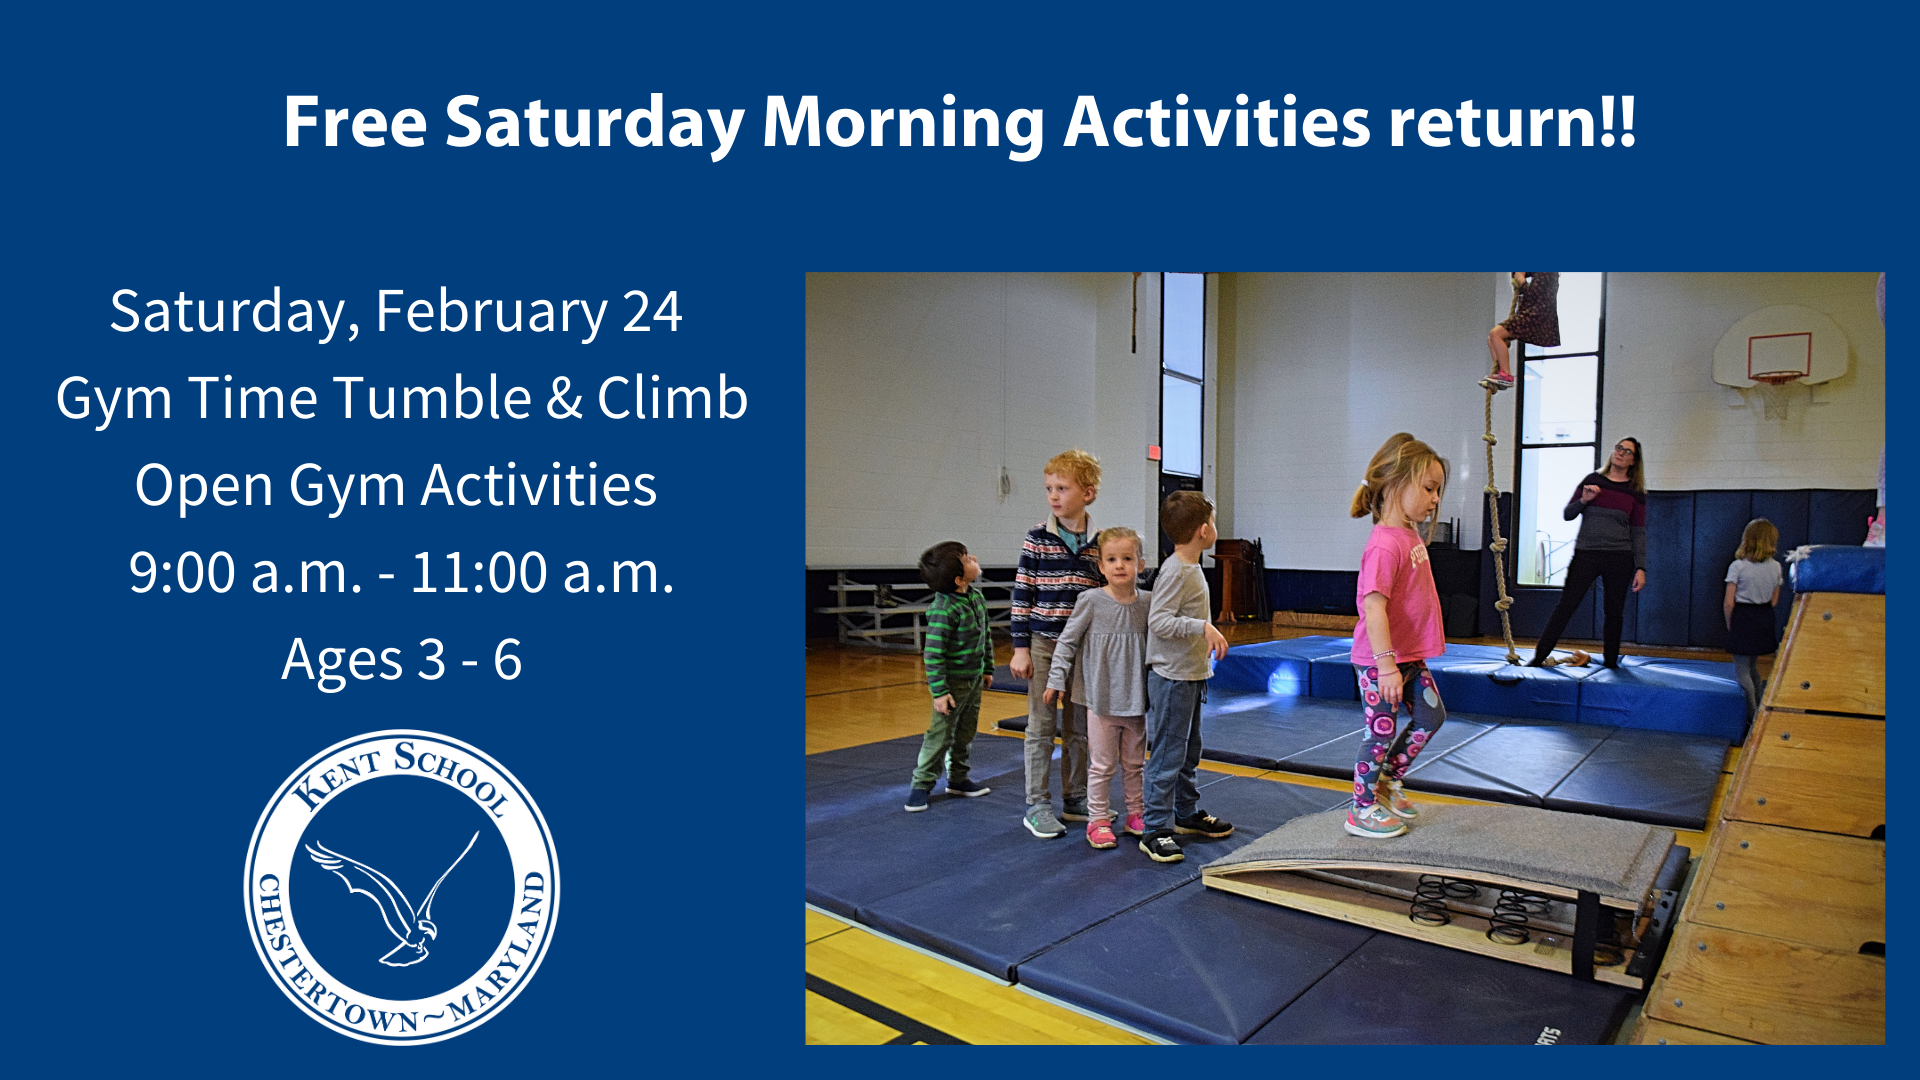 Kent School Saturday Series for Children: Gym Time Tumble and Climb